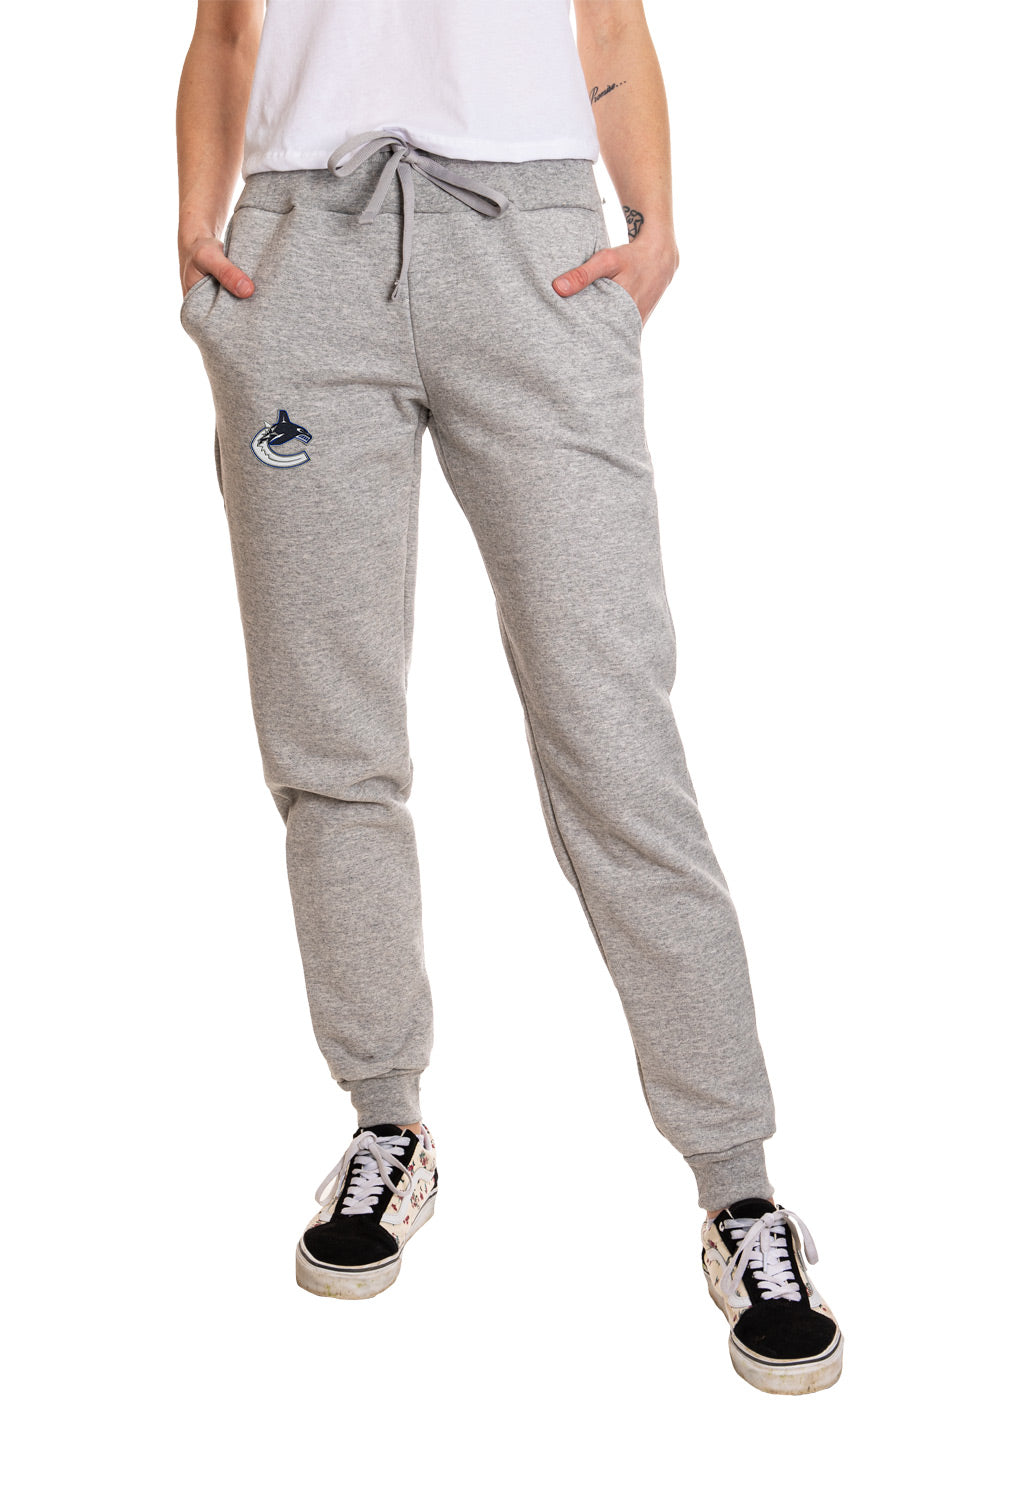 Vancouver Canucks Ladies Cuffed Jogger Style Track Pants